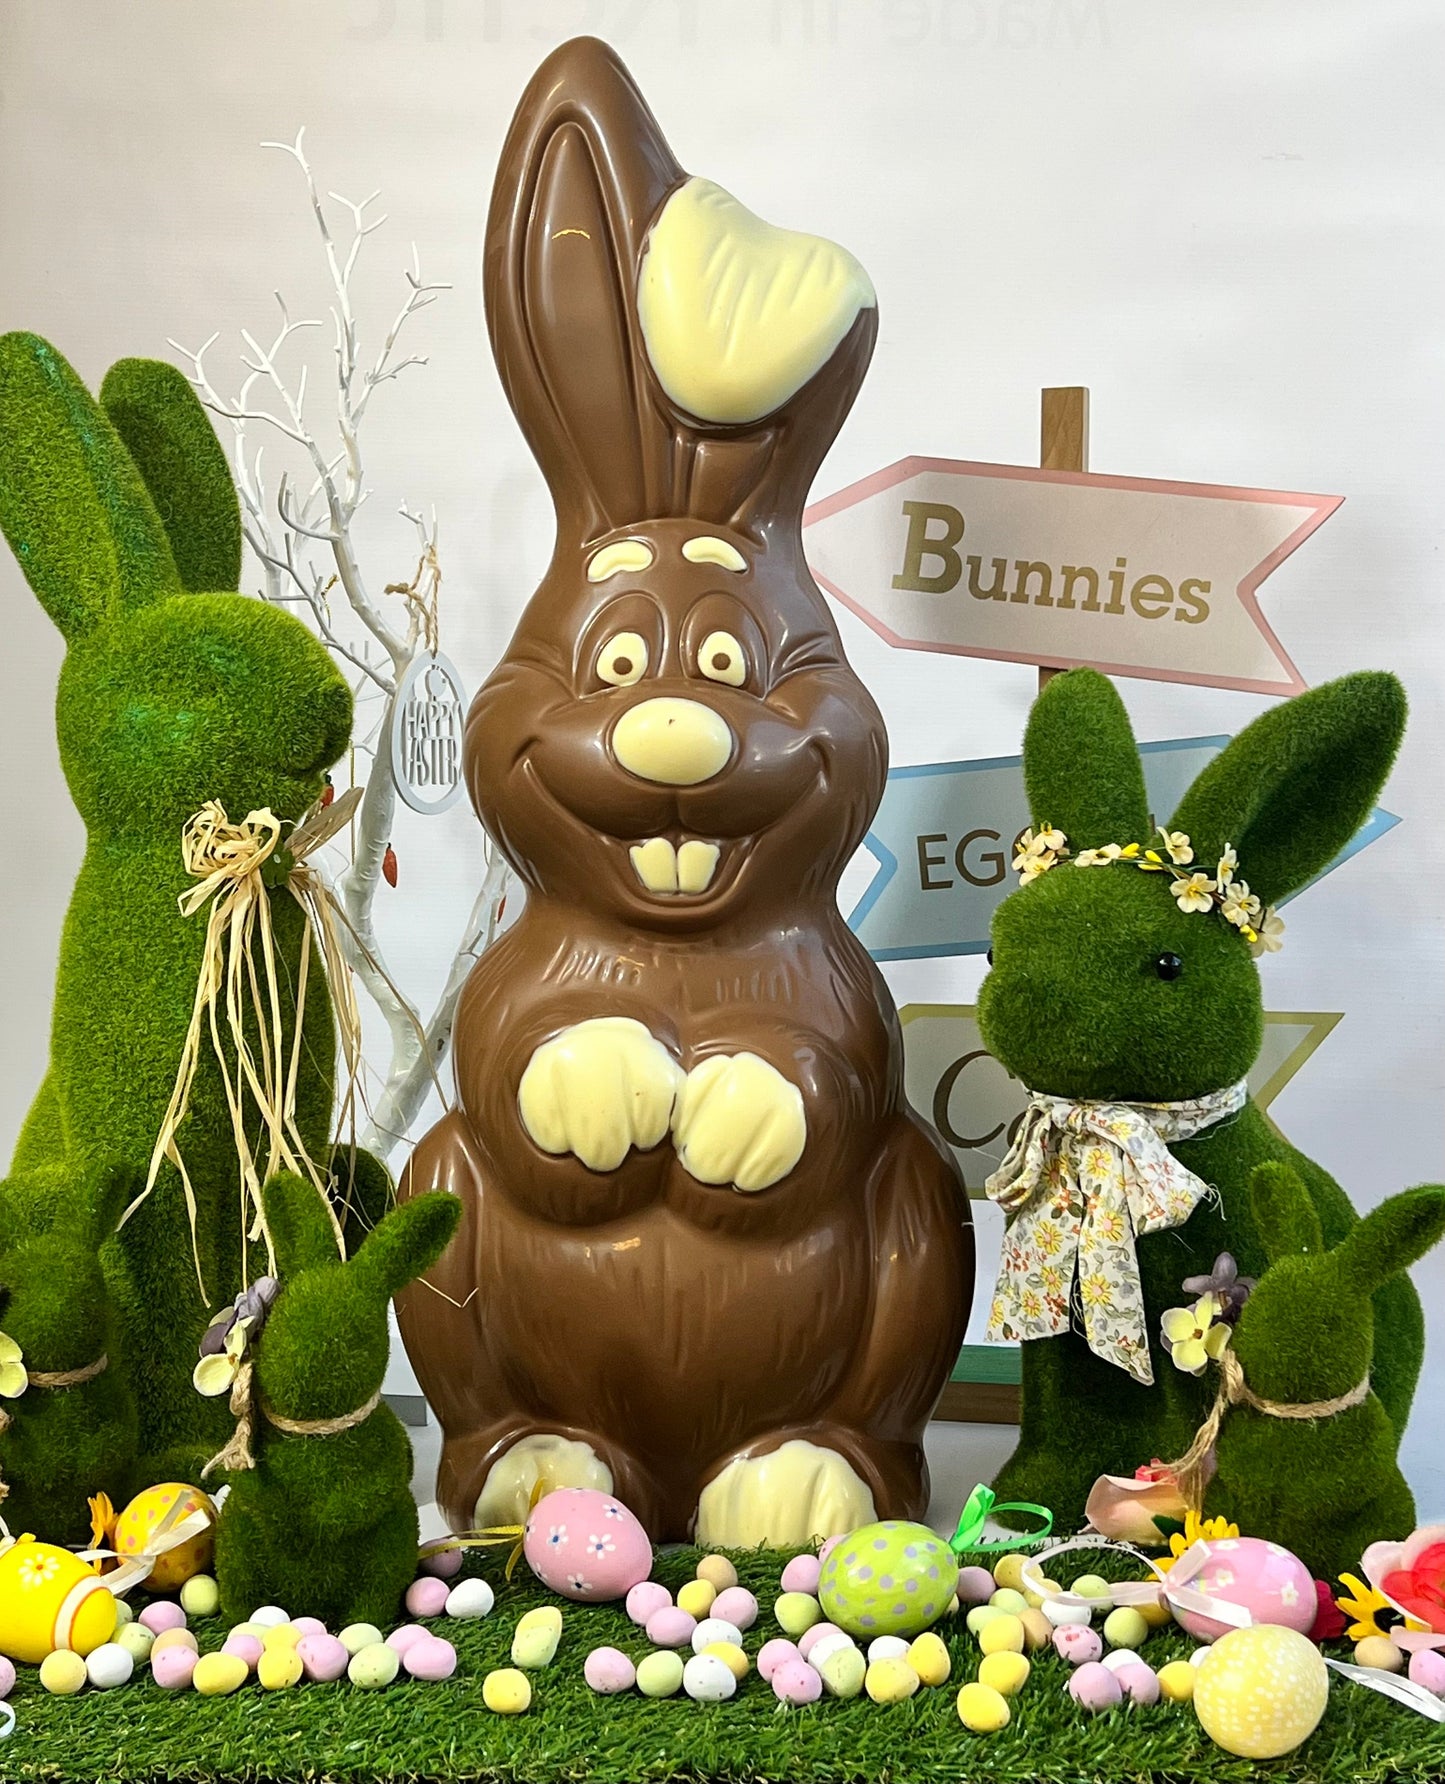 Giant Milk Chocolate Easter Bunny, 5kg - 25 inches tall!